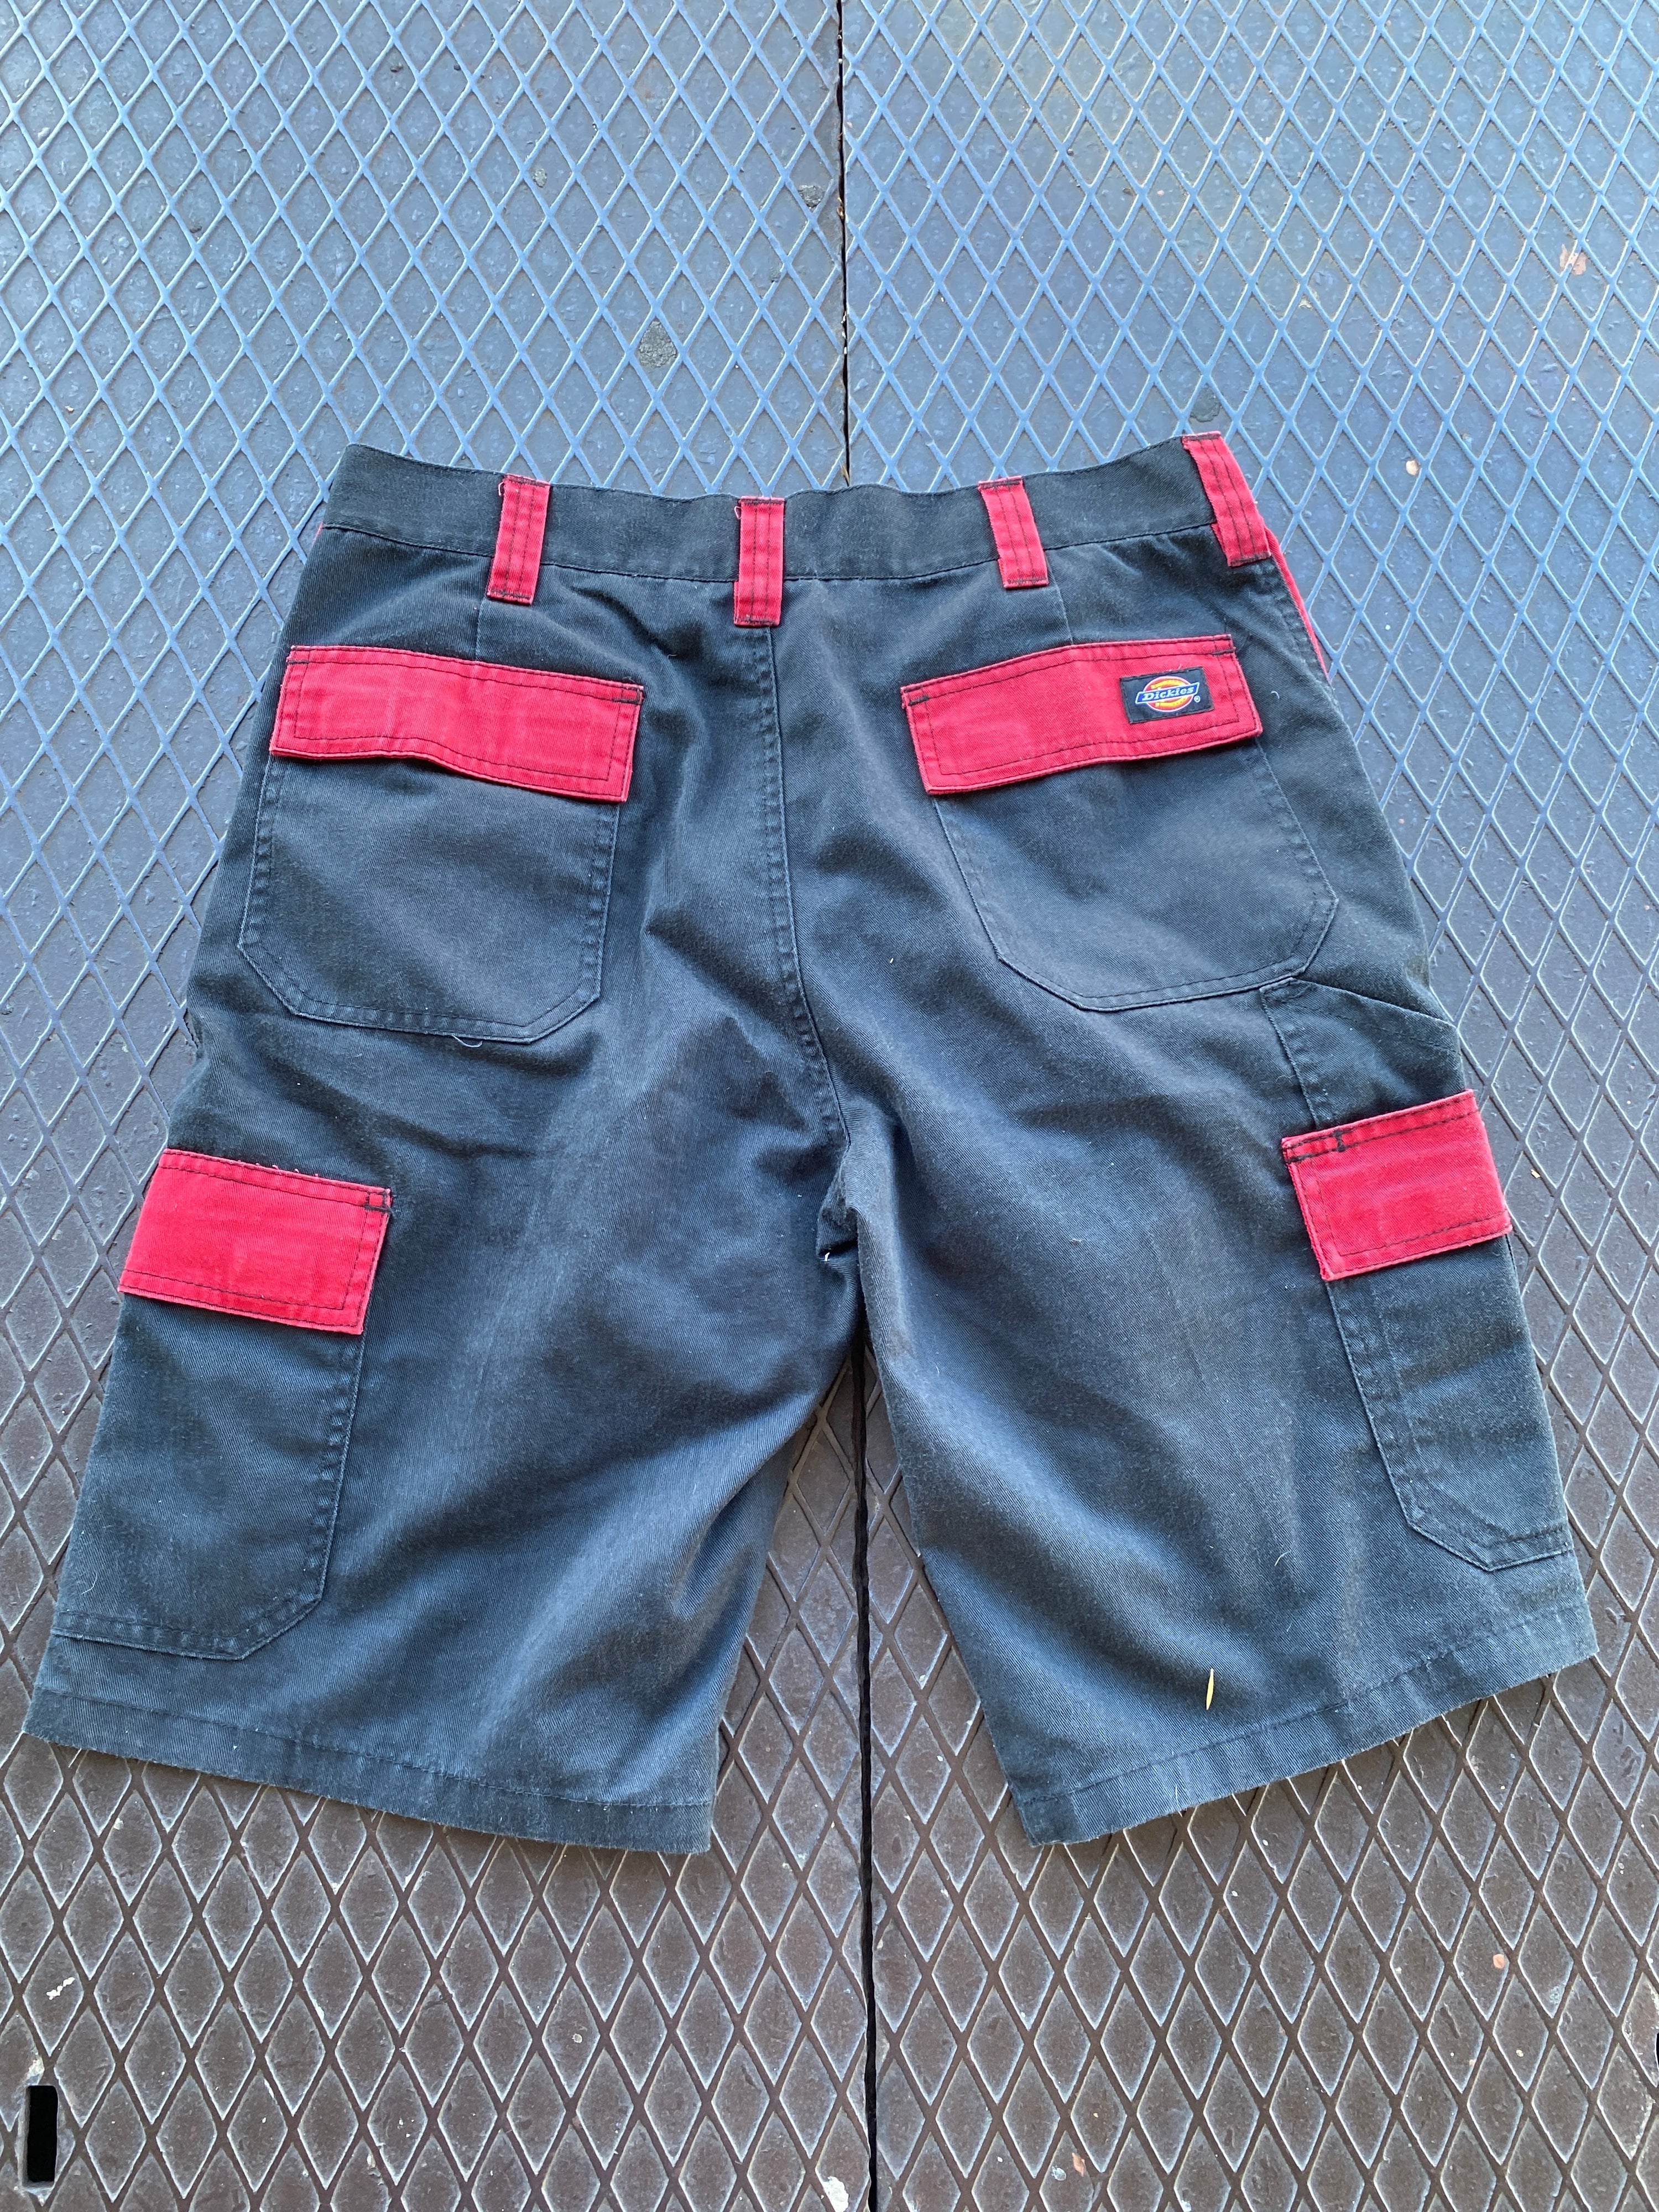 32 - Dickies Cargo Shorts Black/Red Accents